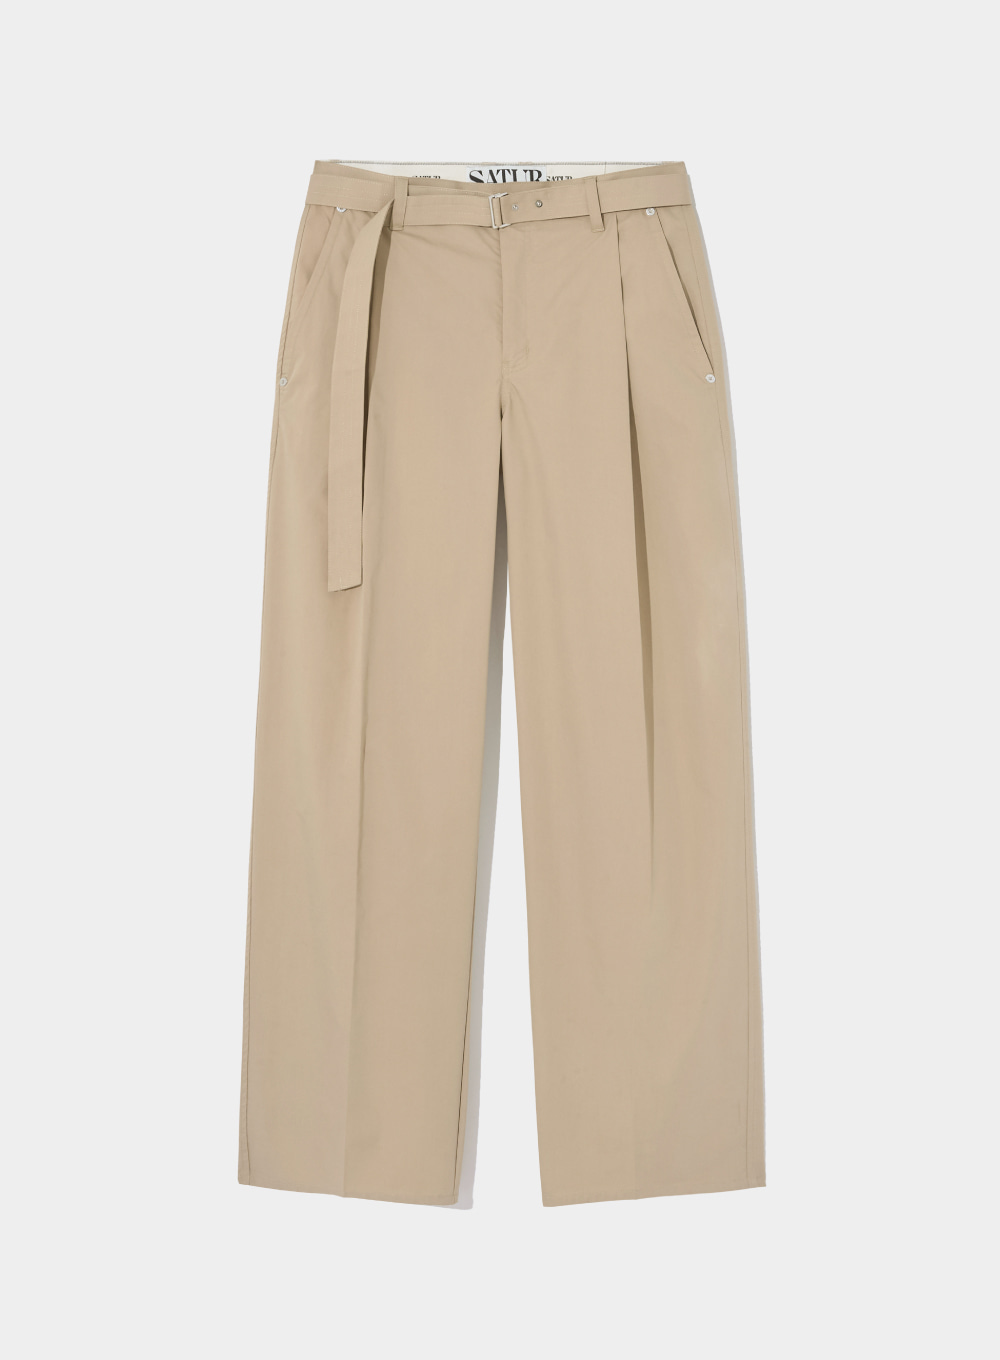 Tallinn One Tuck Tailored Belted Chino Pants - Heritage Beige